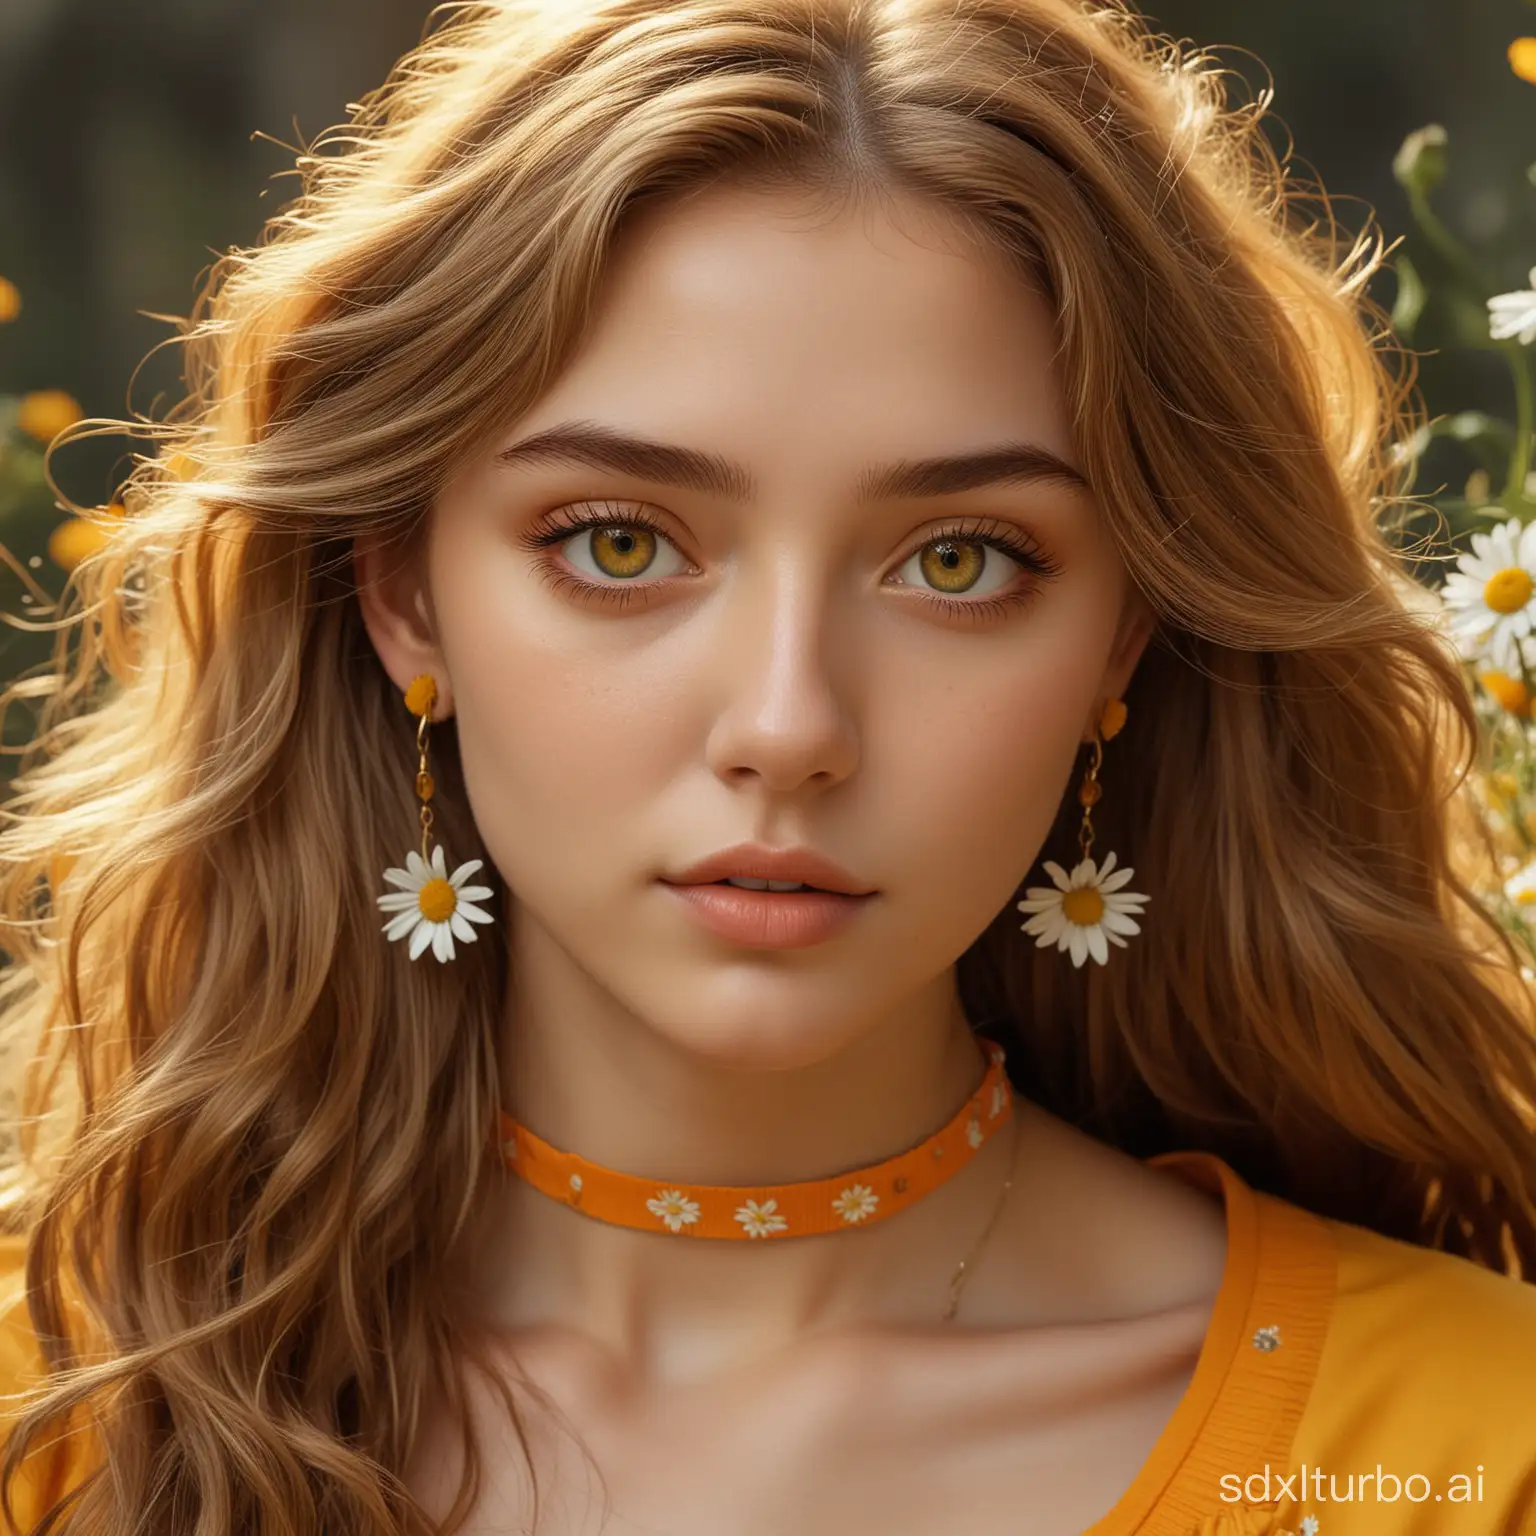 Exquisite-Portrait-of-a-Girl-with-Yellow-Earrings-and-Choker-Surrounded-by-Daisies